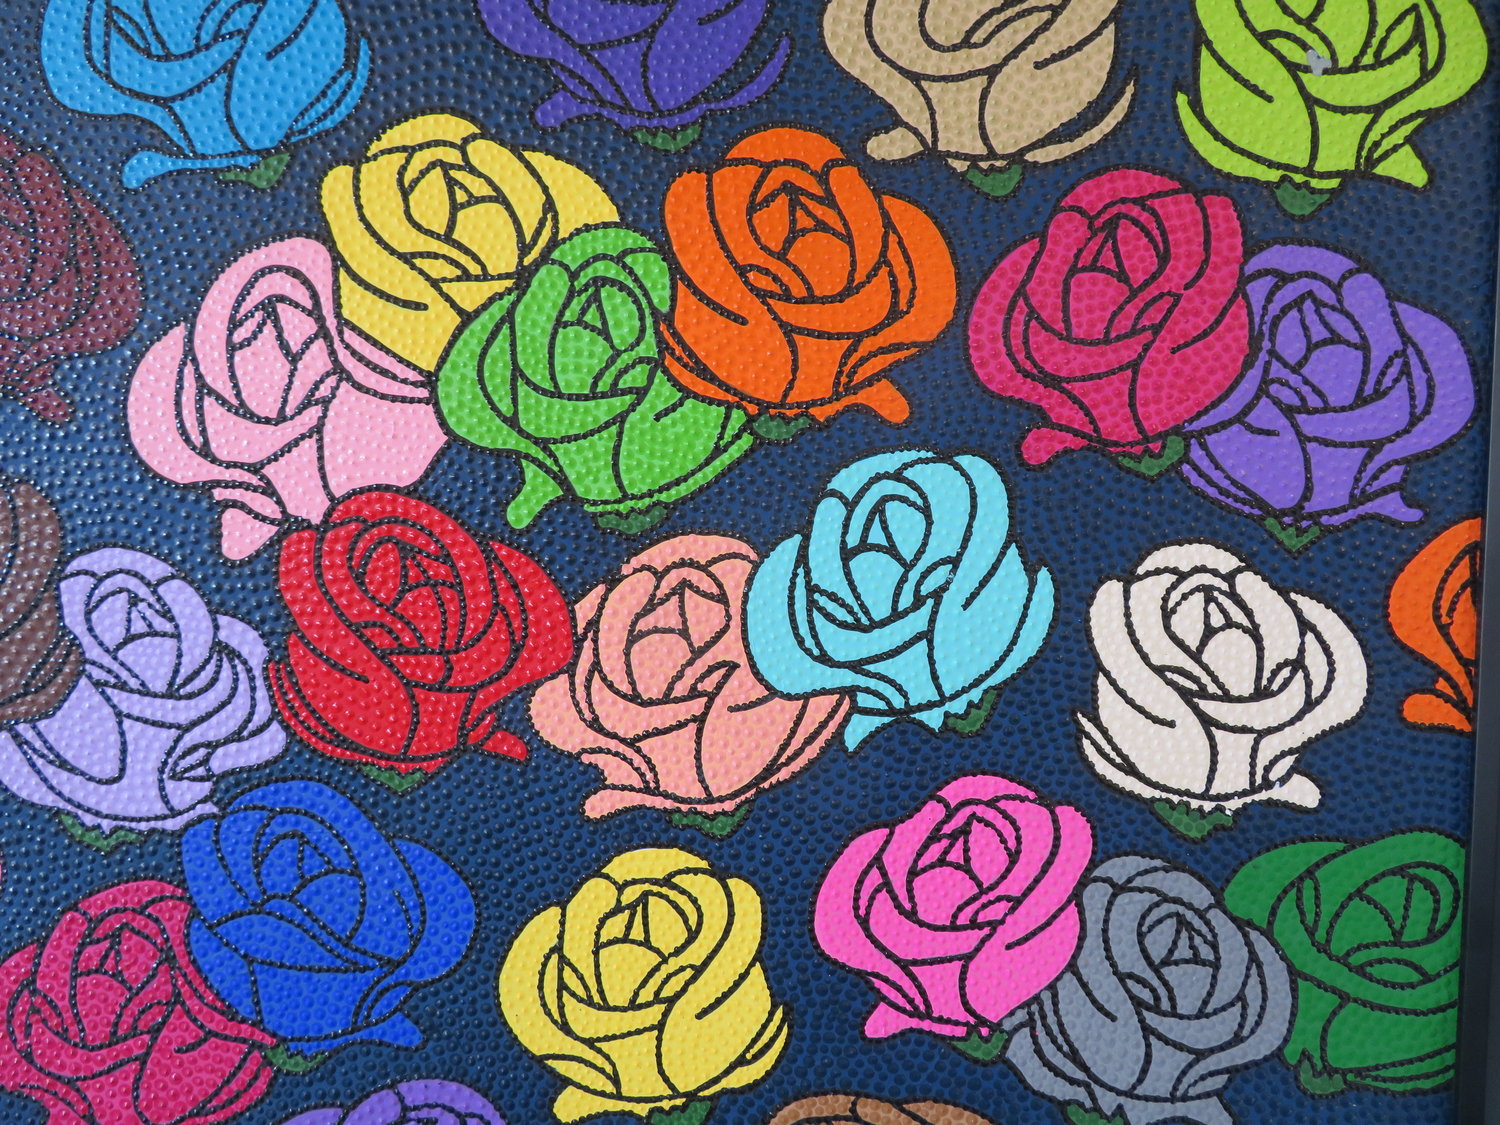 A floating matrix of impossibly hued roses is a tribute to the artist’s mother.